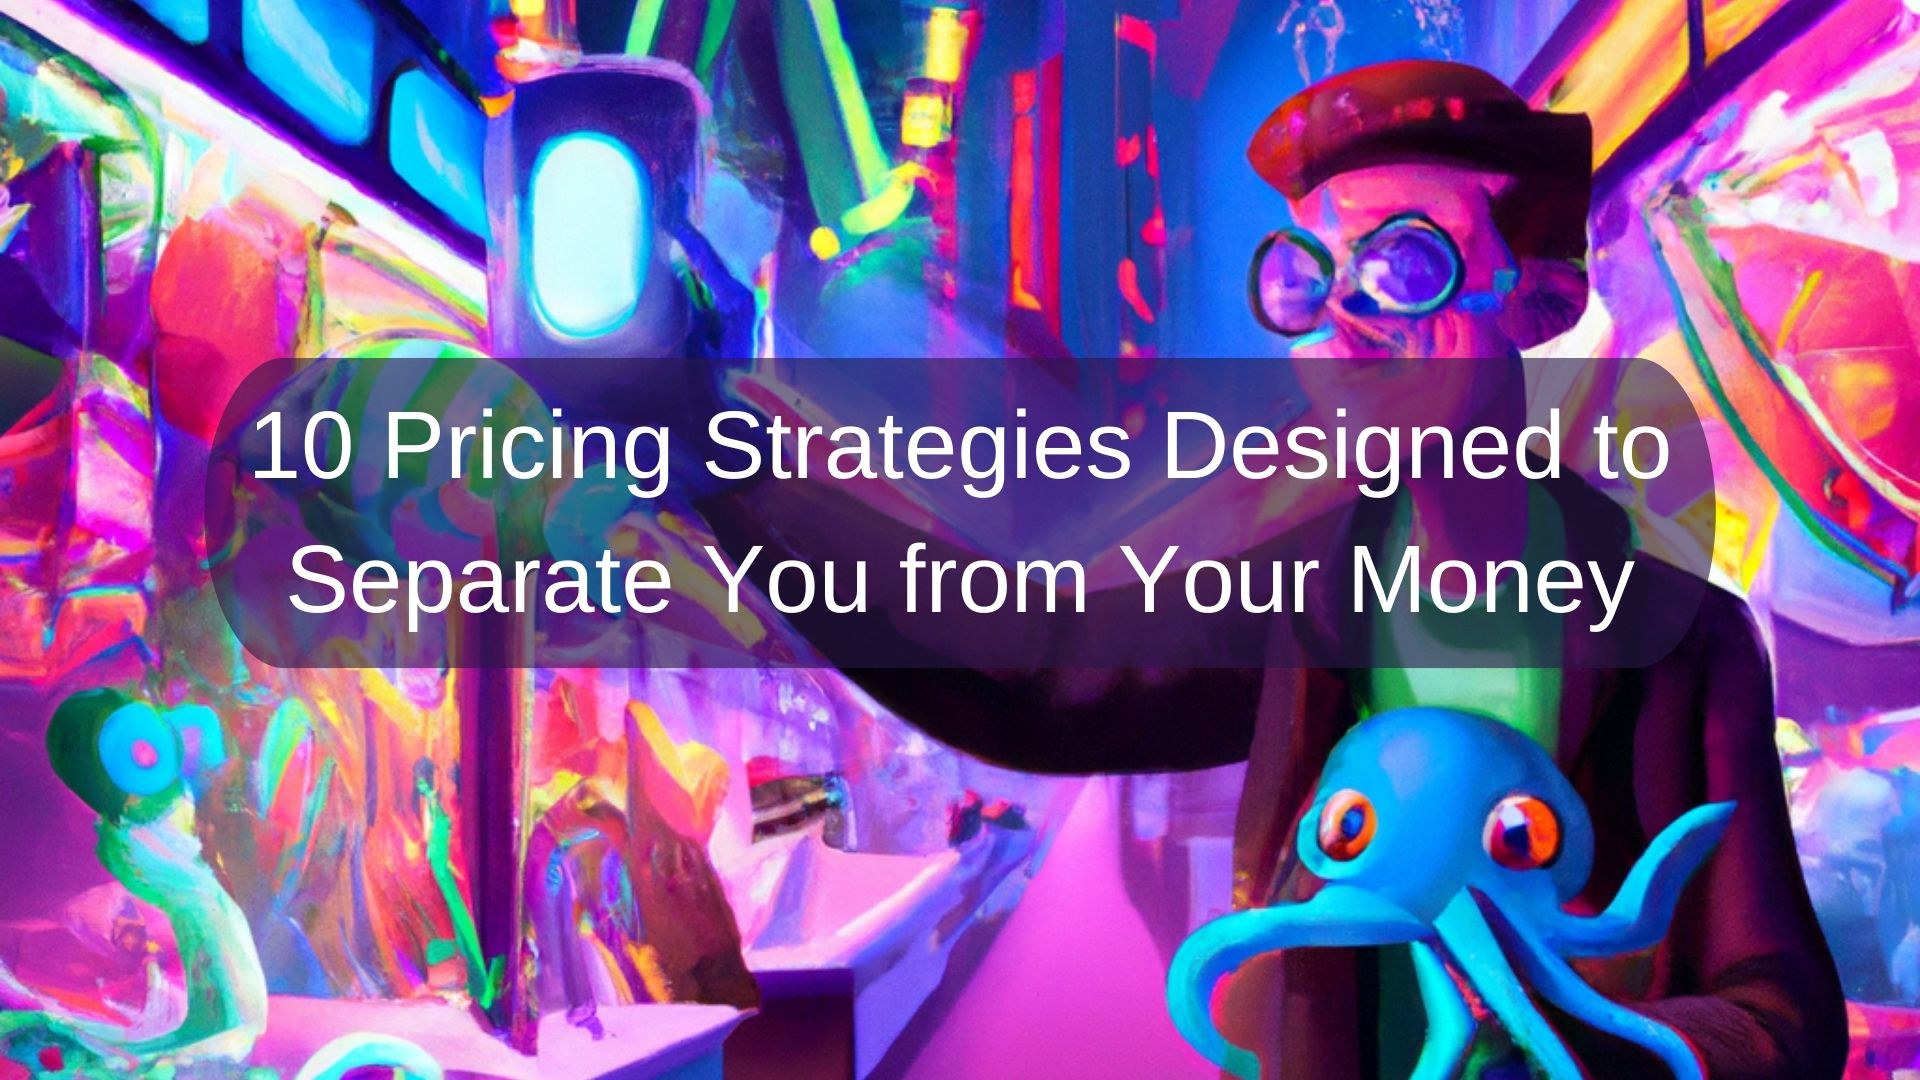 10 Pricing Strategies Designed to Separate You from Your Money